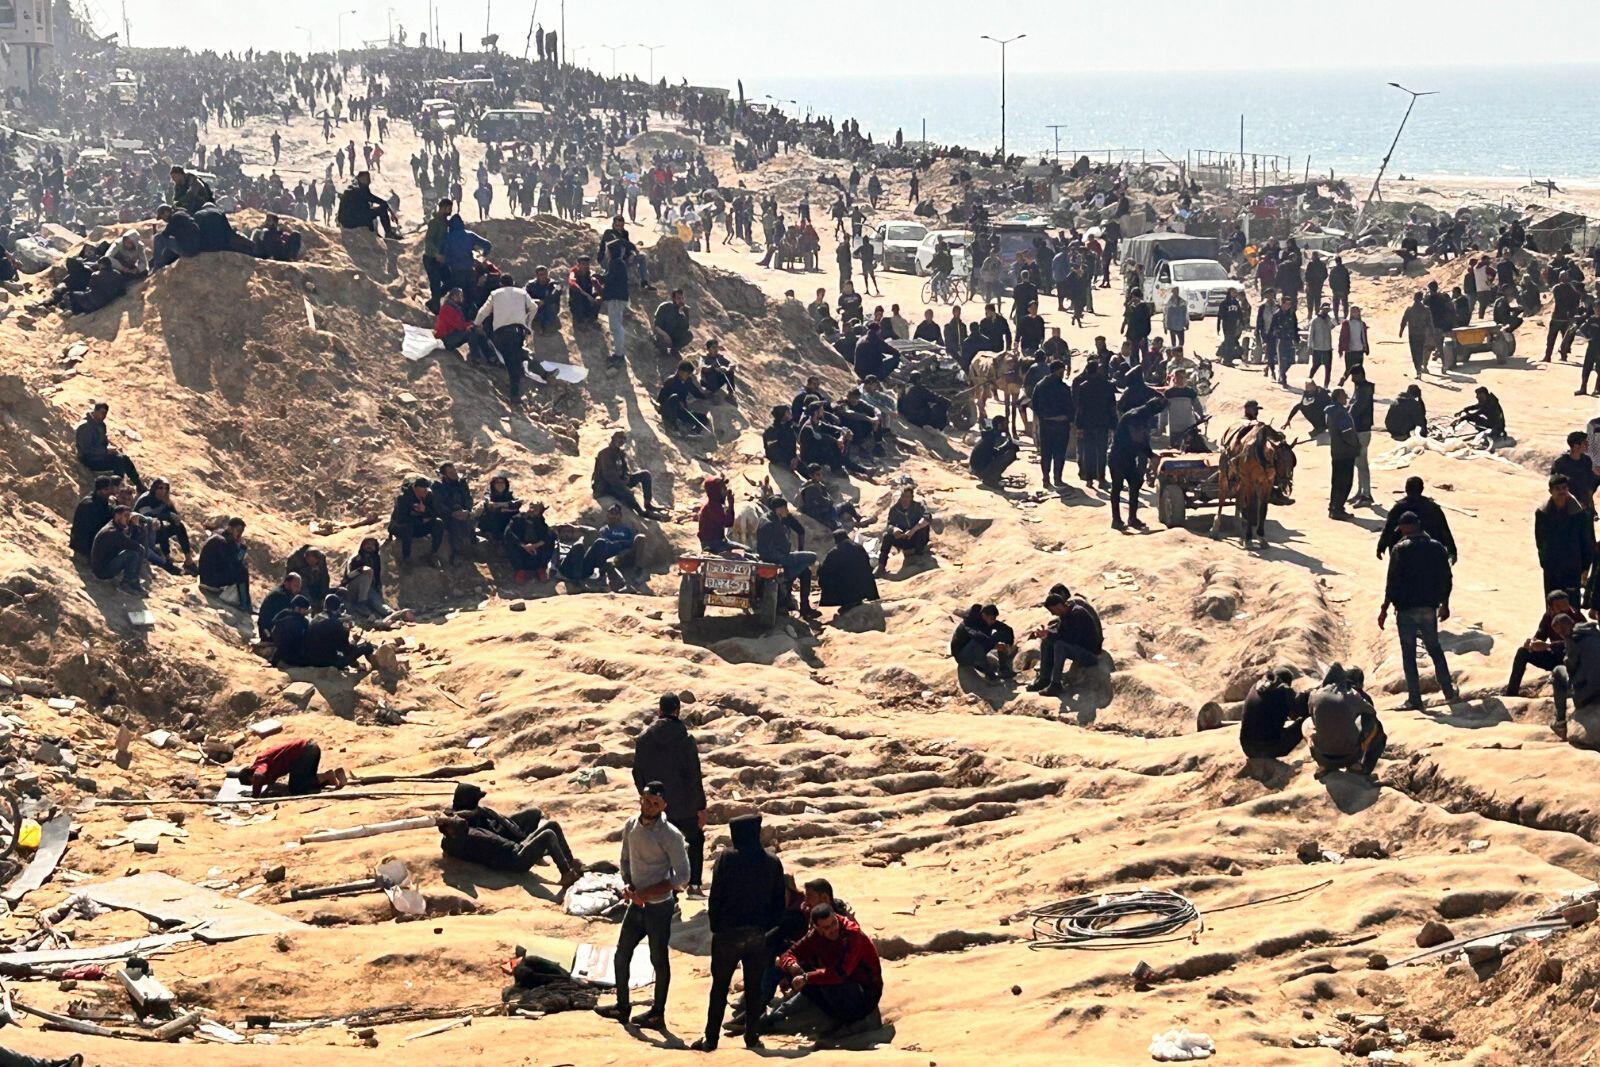 Palestinians wait for humanitarian aid on a beachfront in Gaza City